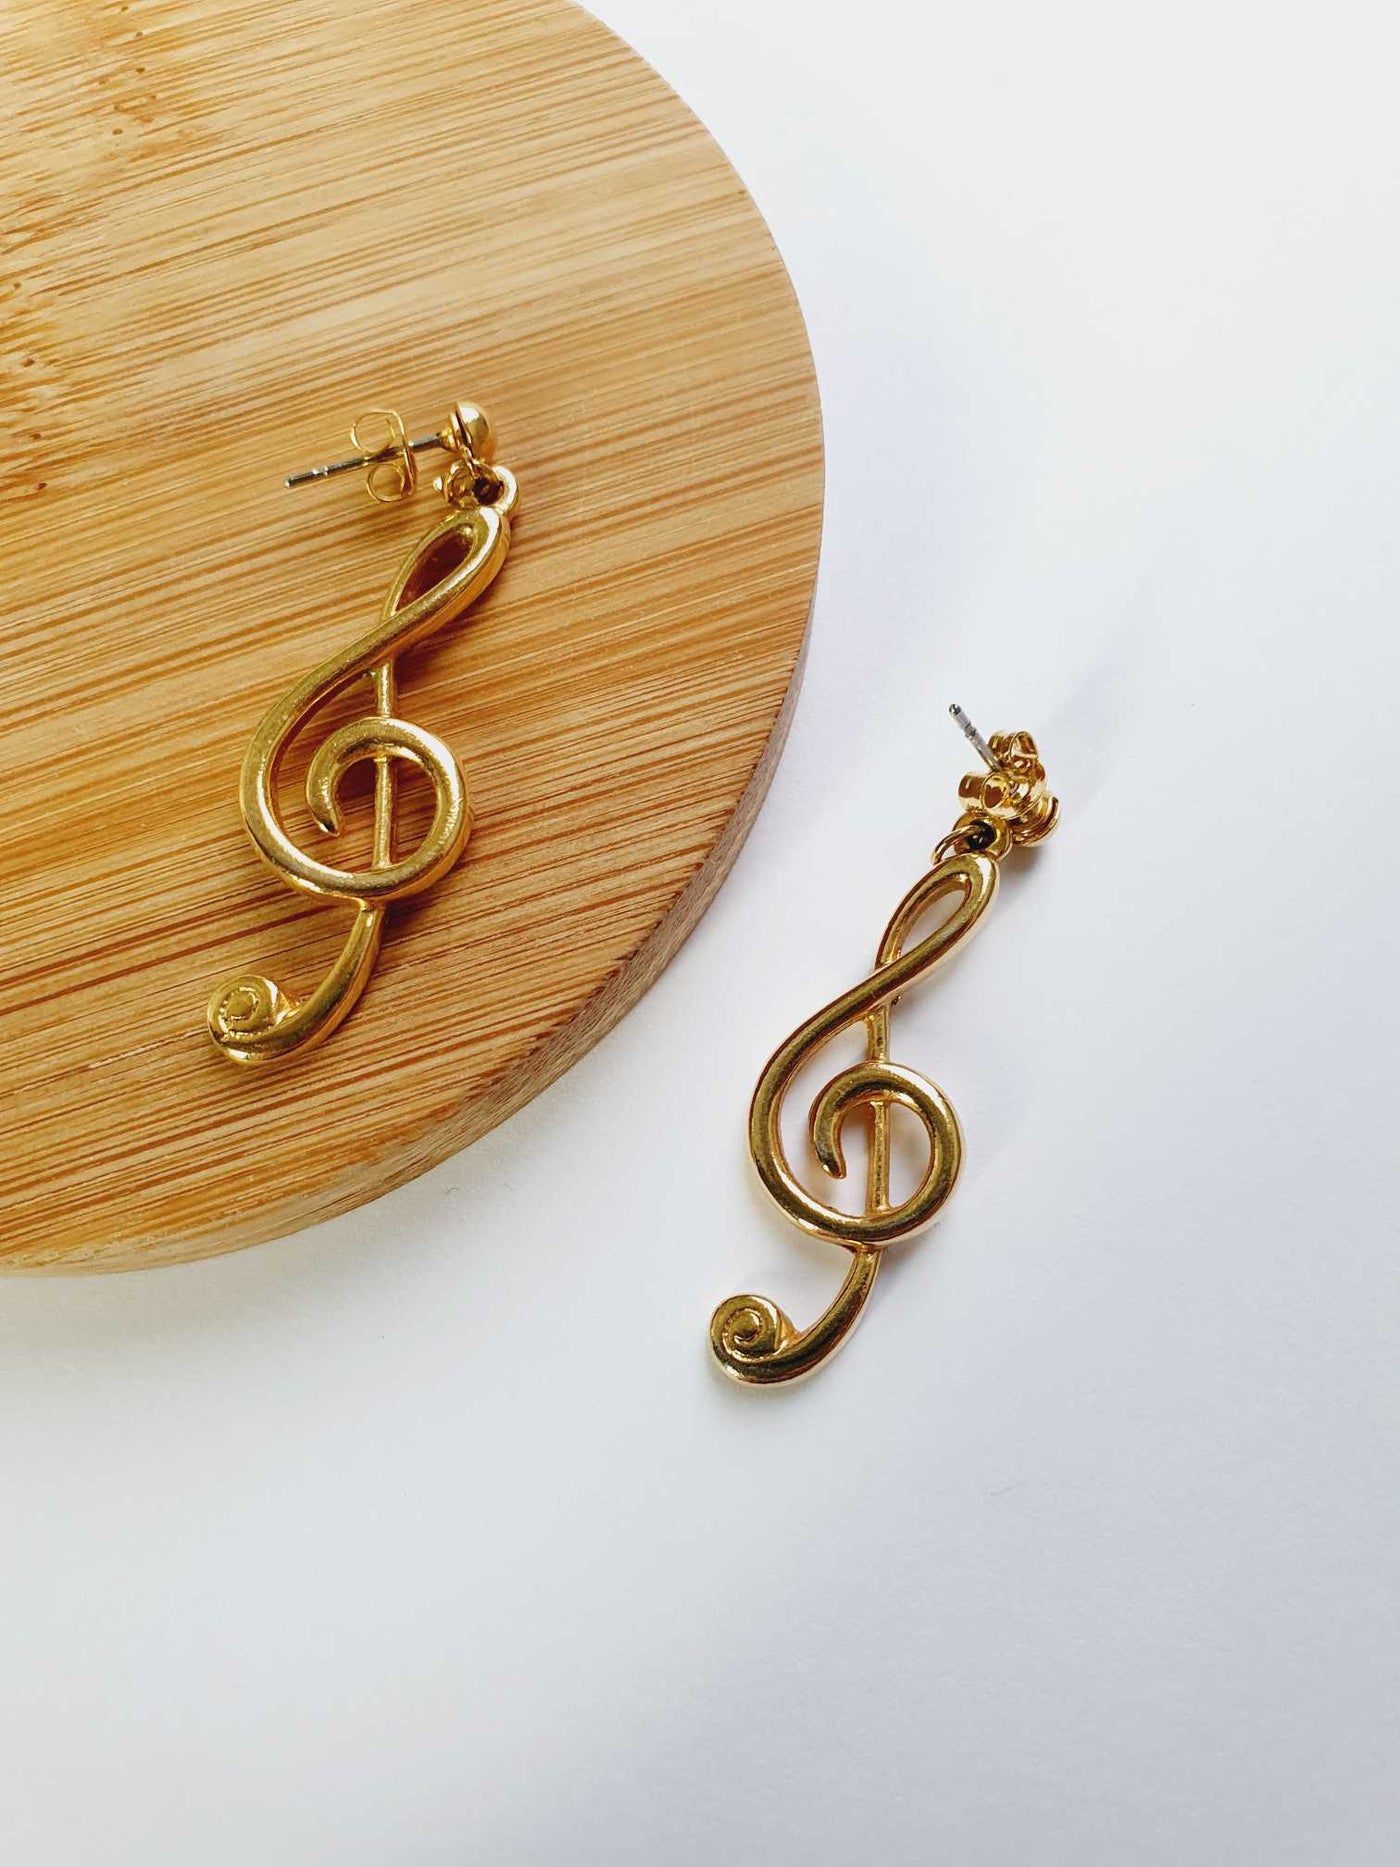 Vintage Gold Plated Clef Note Stud Earrings